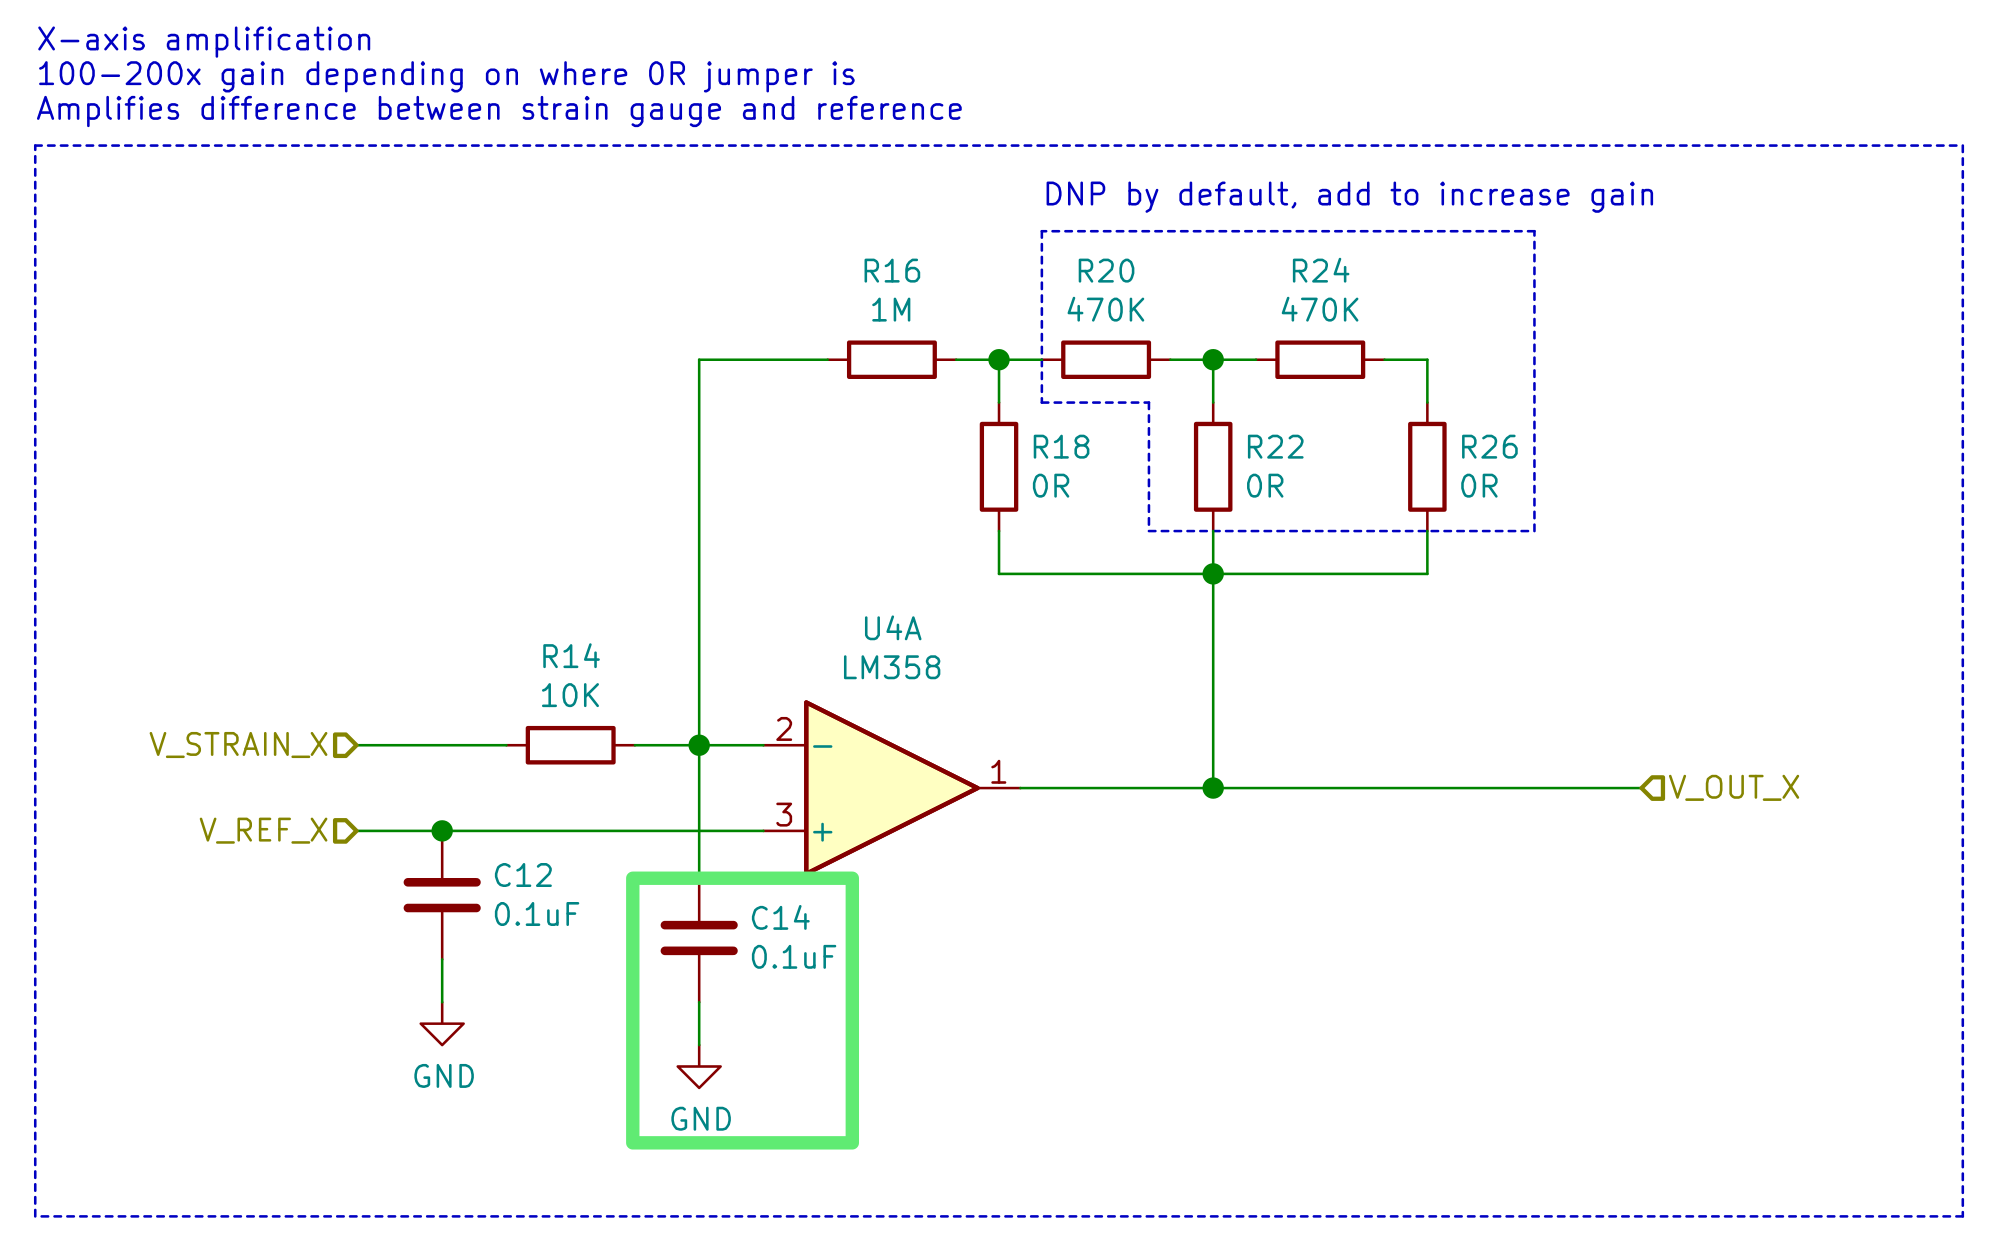 The X-axis opamp part of the schematic, with a smoothing capacitor, C14, added.